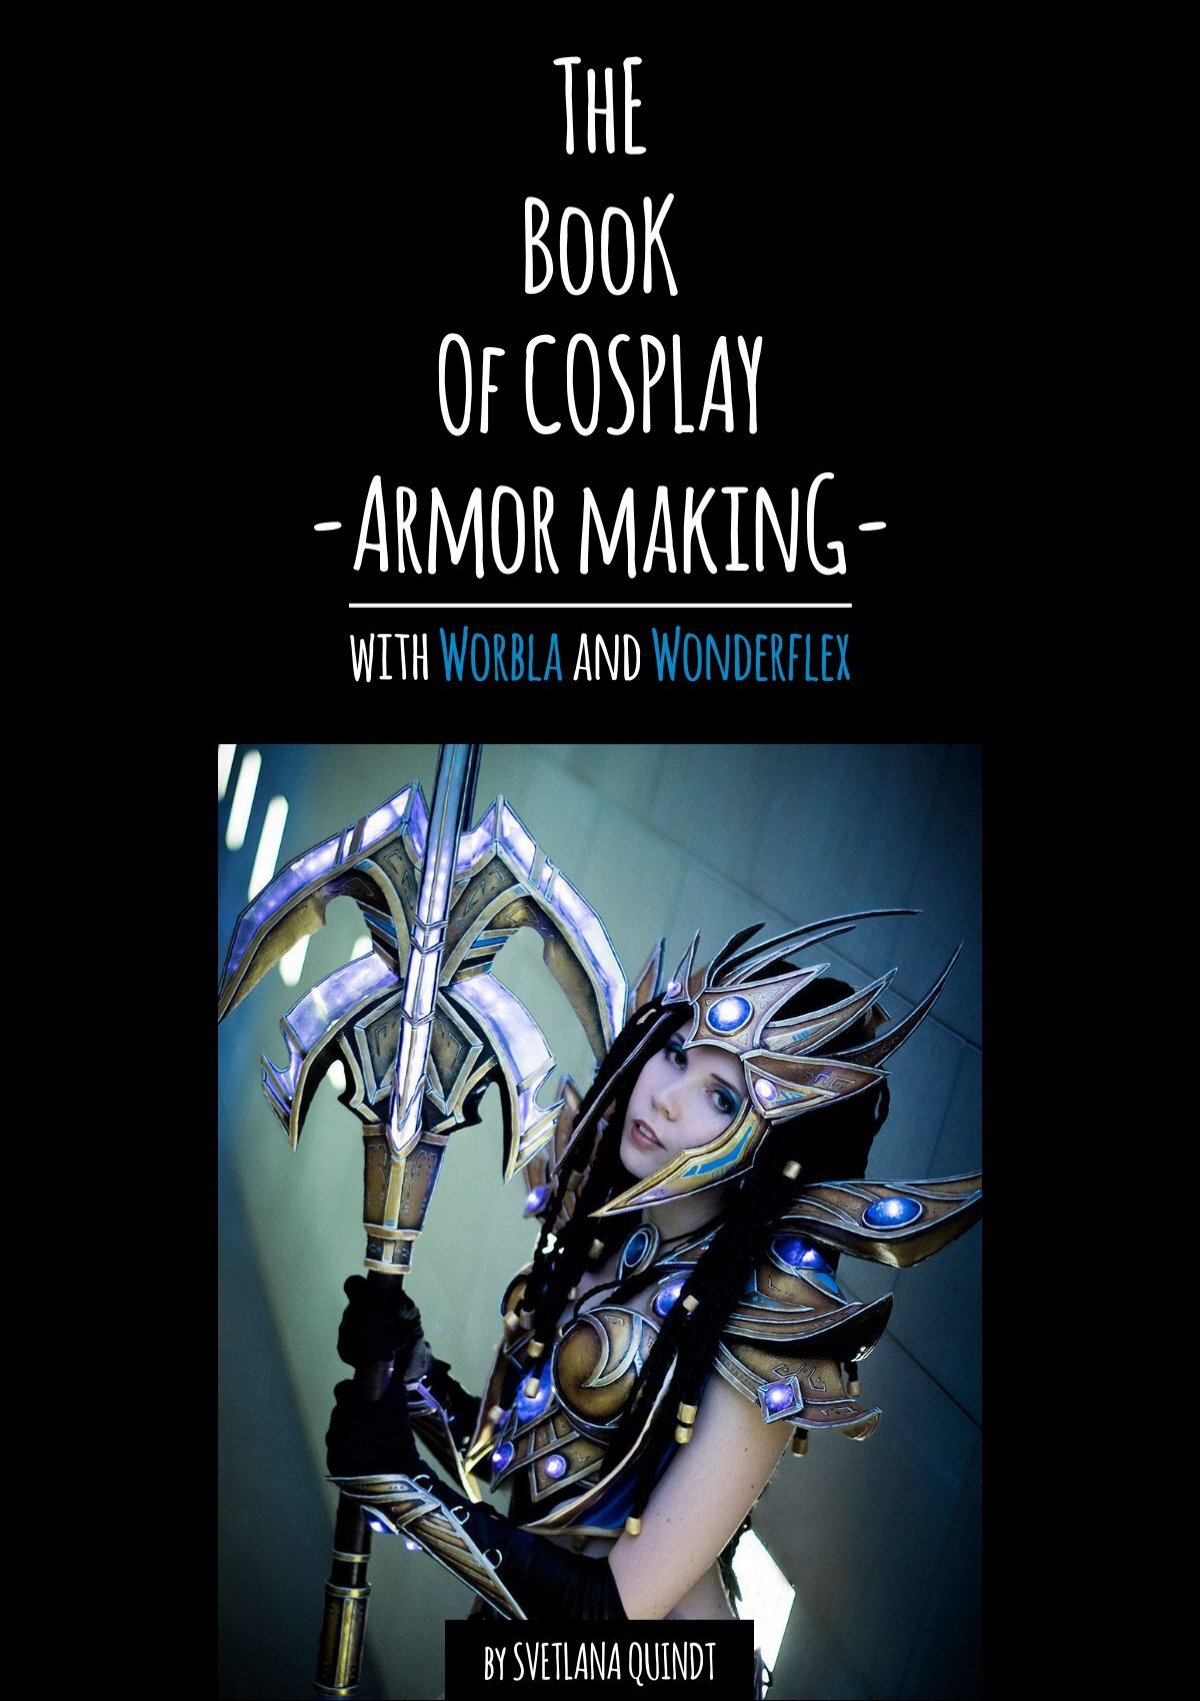 Kamui Cosplay - Worbla or EVA foam, what's the difference?